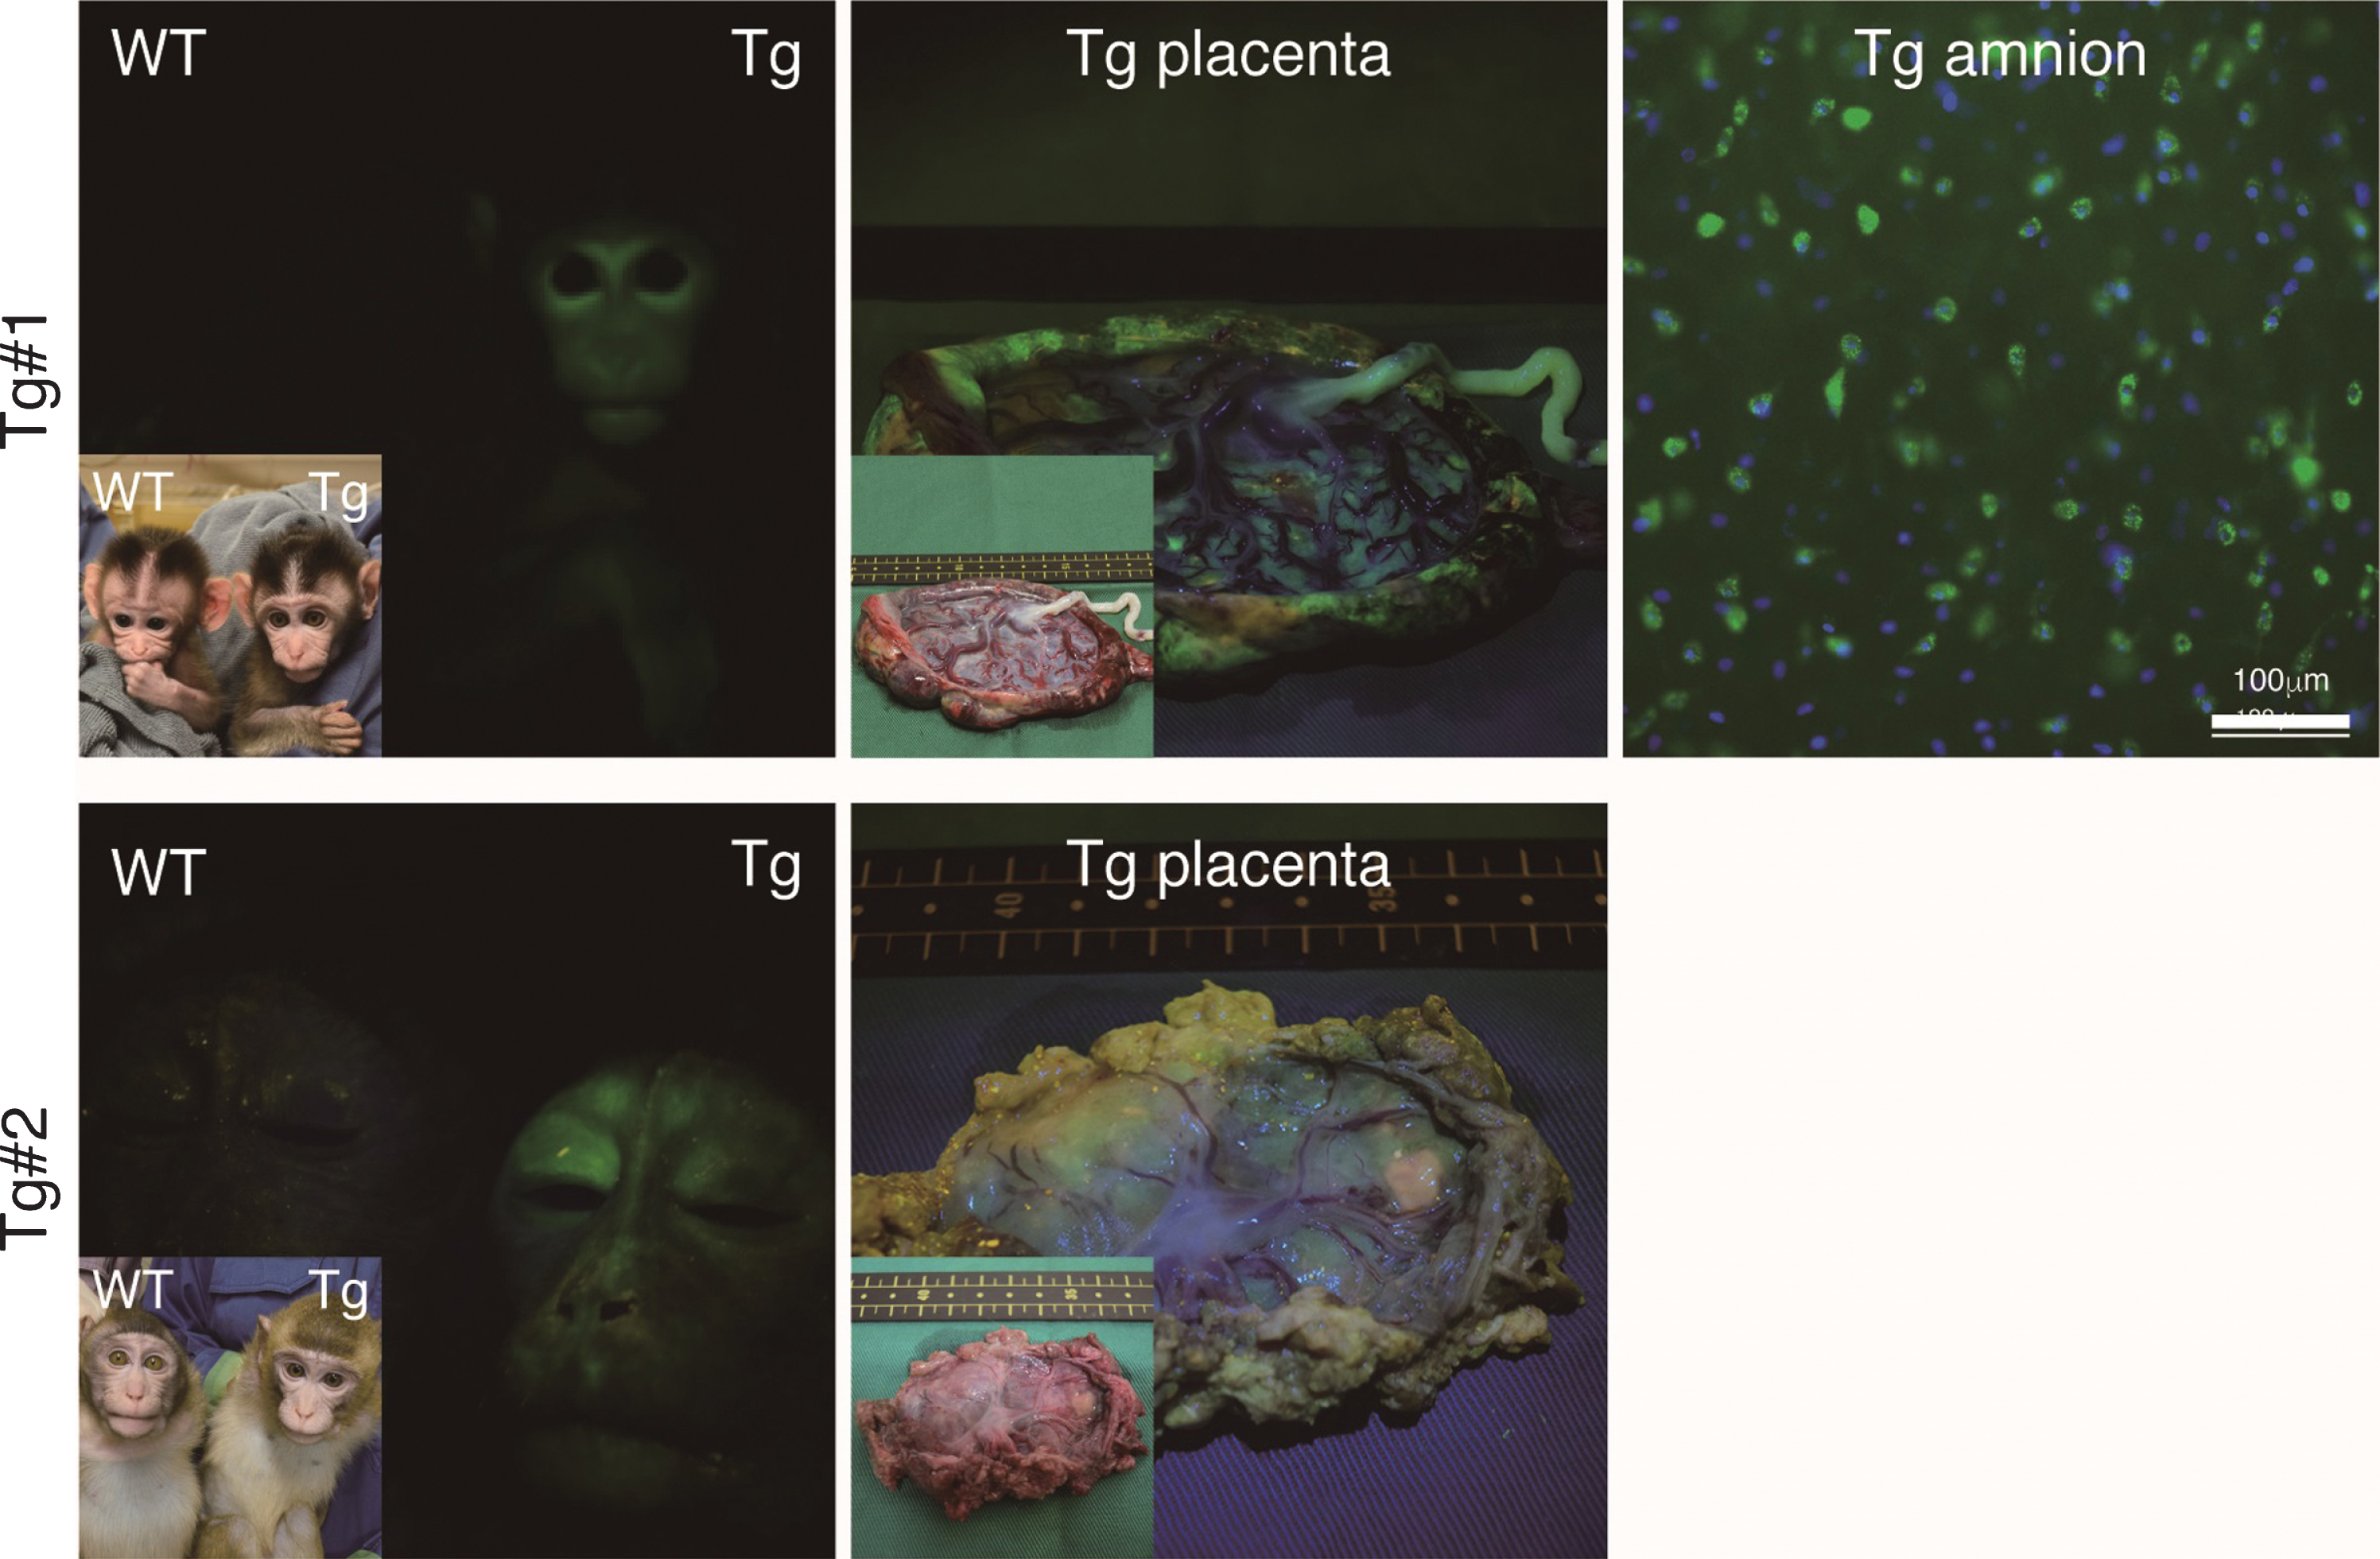 Fluorescence images of the Tg cynomolgus monkeys. Upper panels showing fluorescence images of the face, placenta and amnion of APP-GFP Tg offspring #1. Lower panels showing fluorescence images of the face and placenta of APP-GFP offspring #2. Insets in each panel show brightfield images.